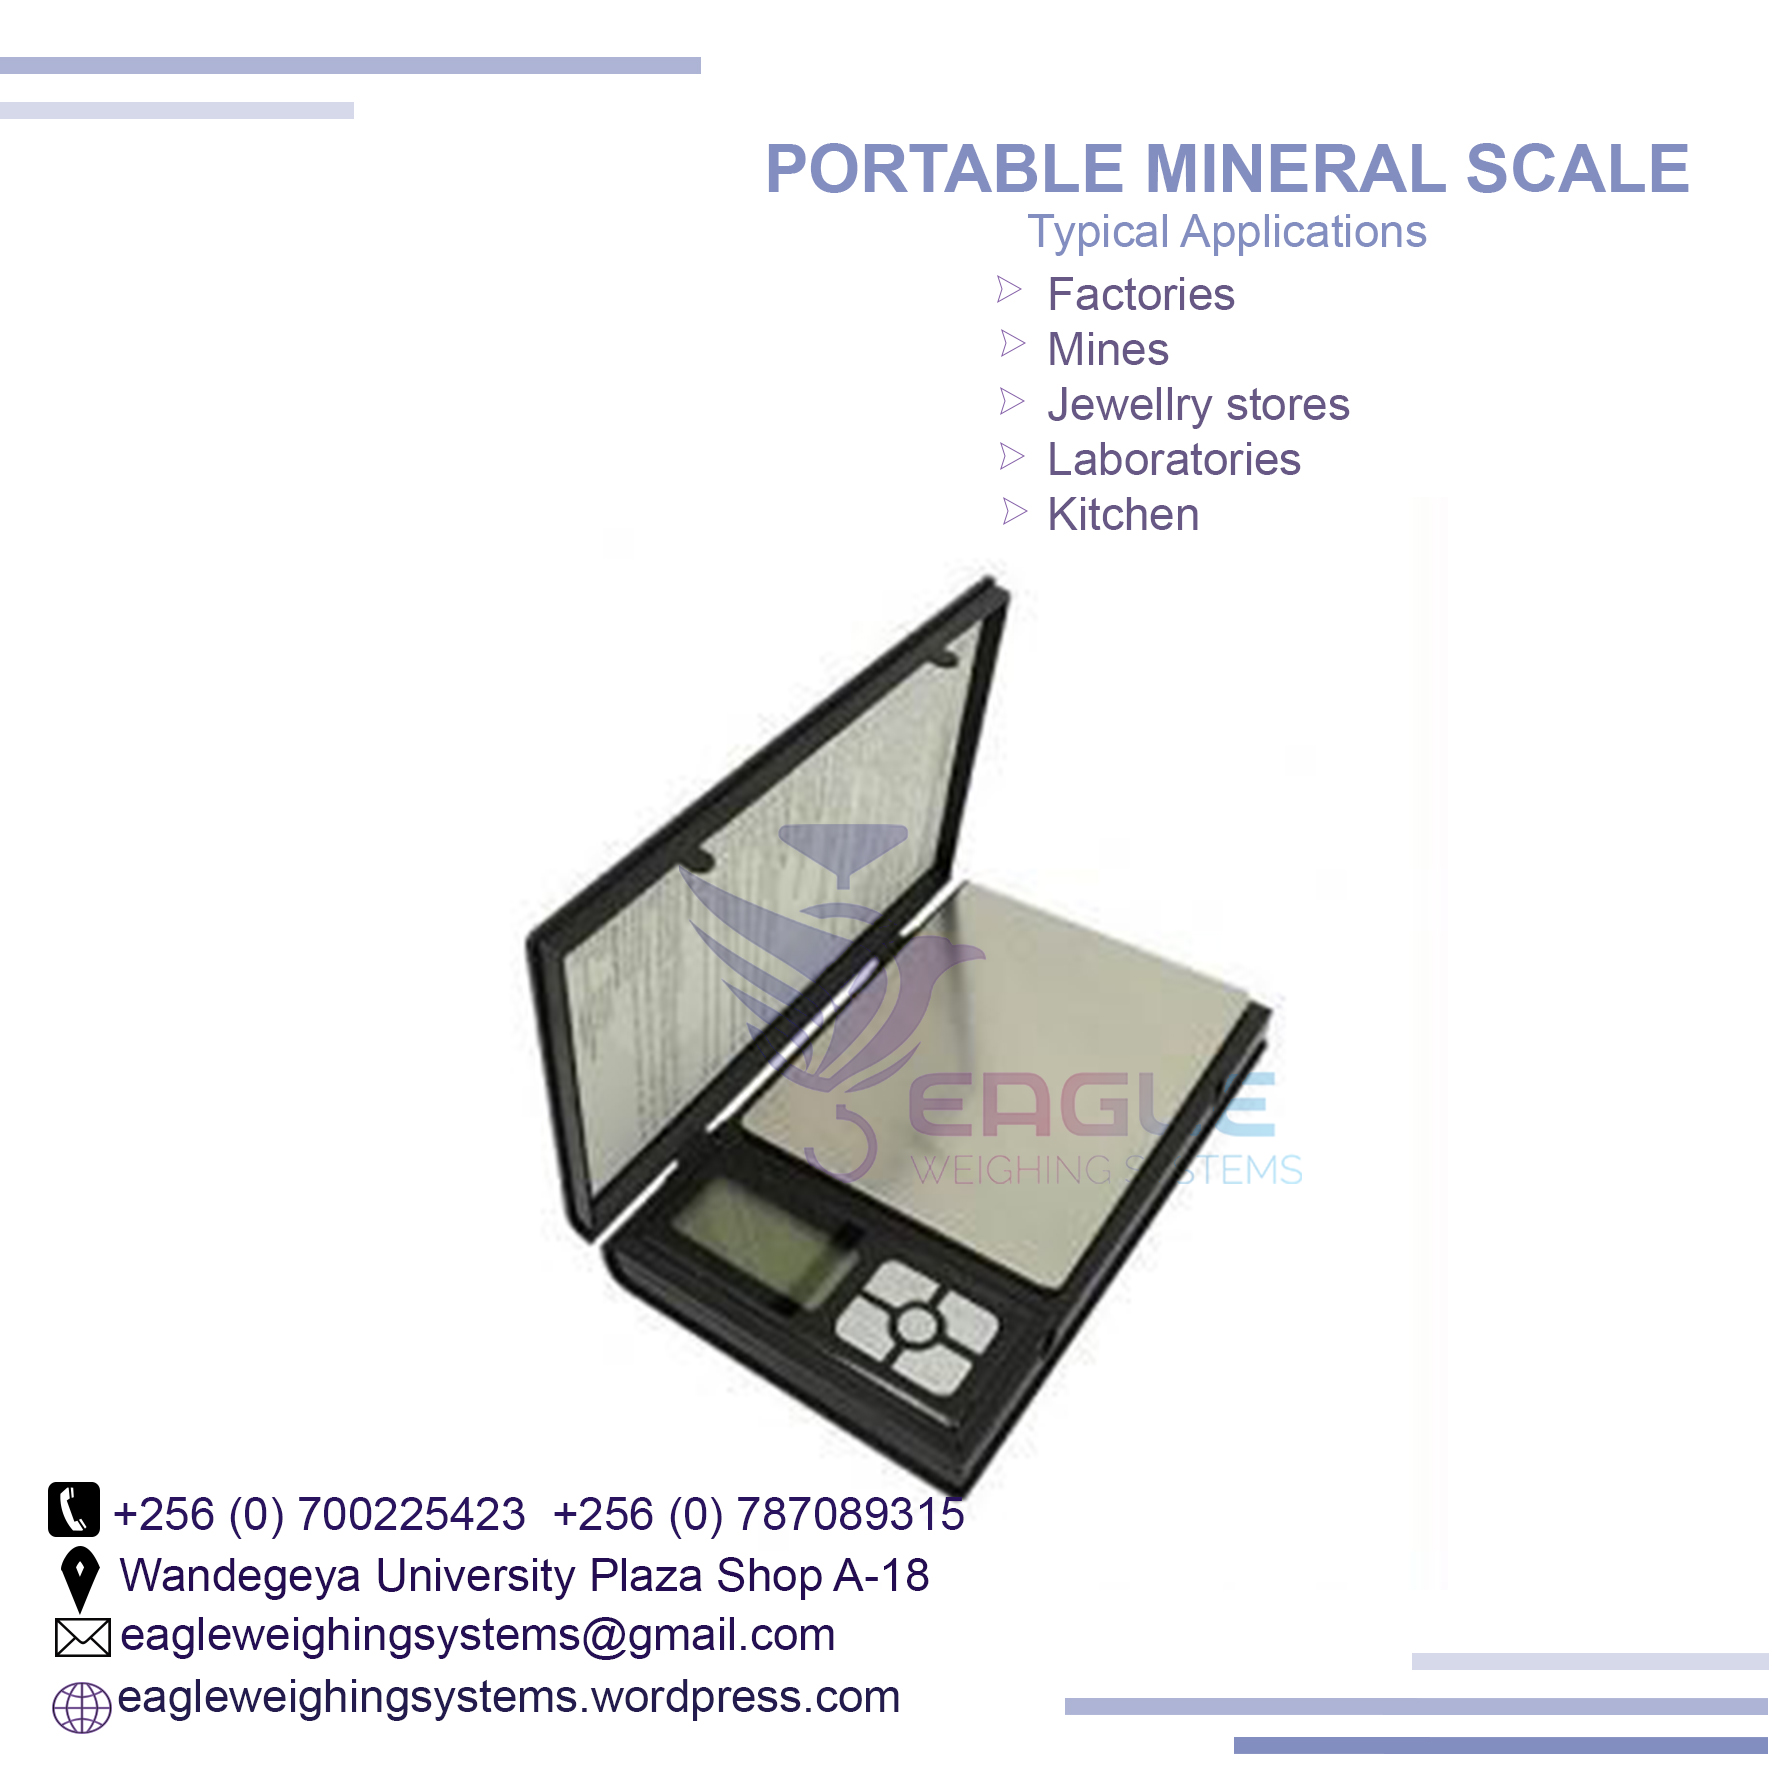 Electronic Weighing Table Portable mineral, jewelry Scales in Kampala, Kampala Central Division, Central, Uganda